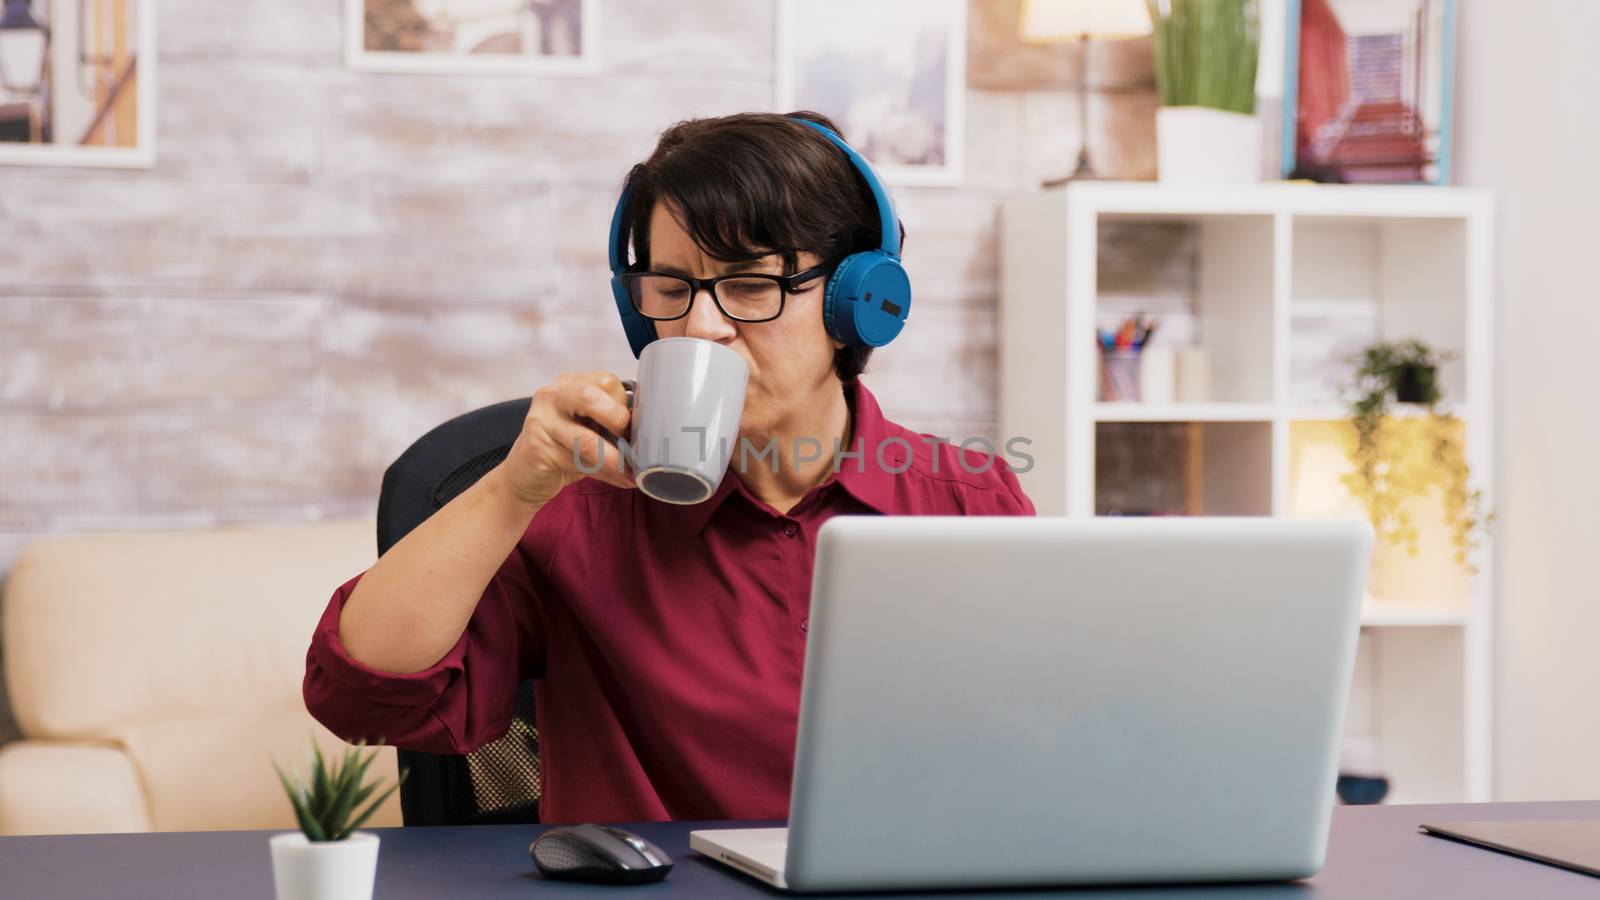 Old woman enjoying a cup of coffee while working on laptop with headphones on her head. Elderly man using tablet in the background.